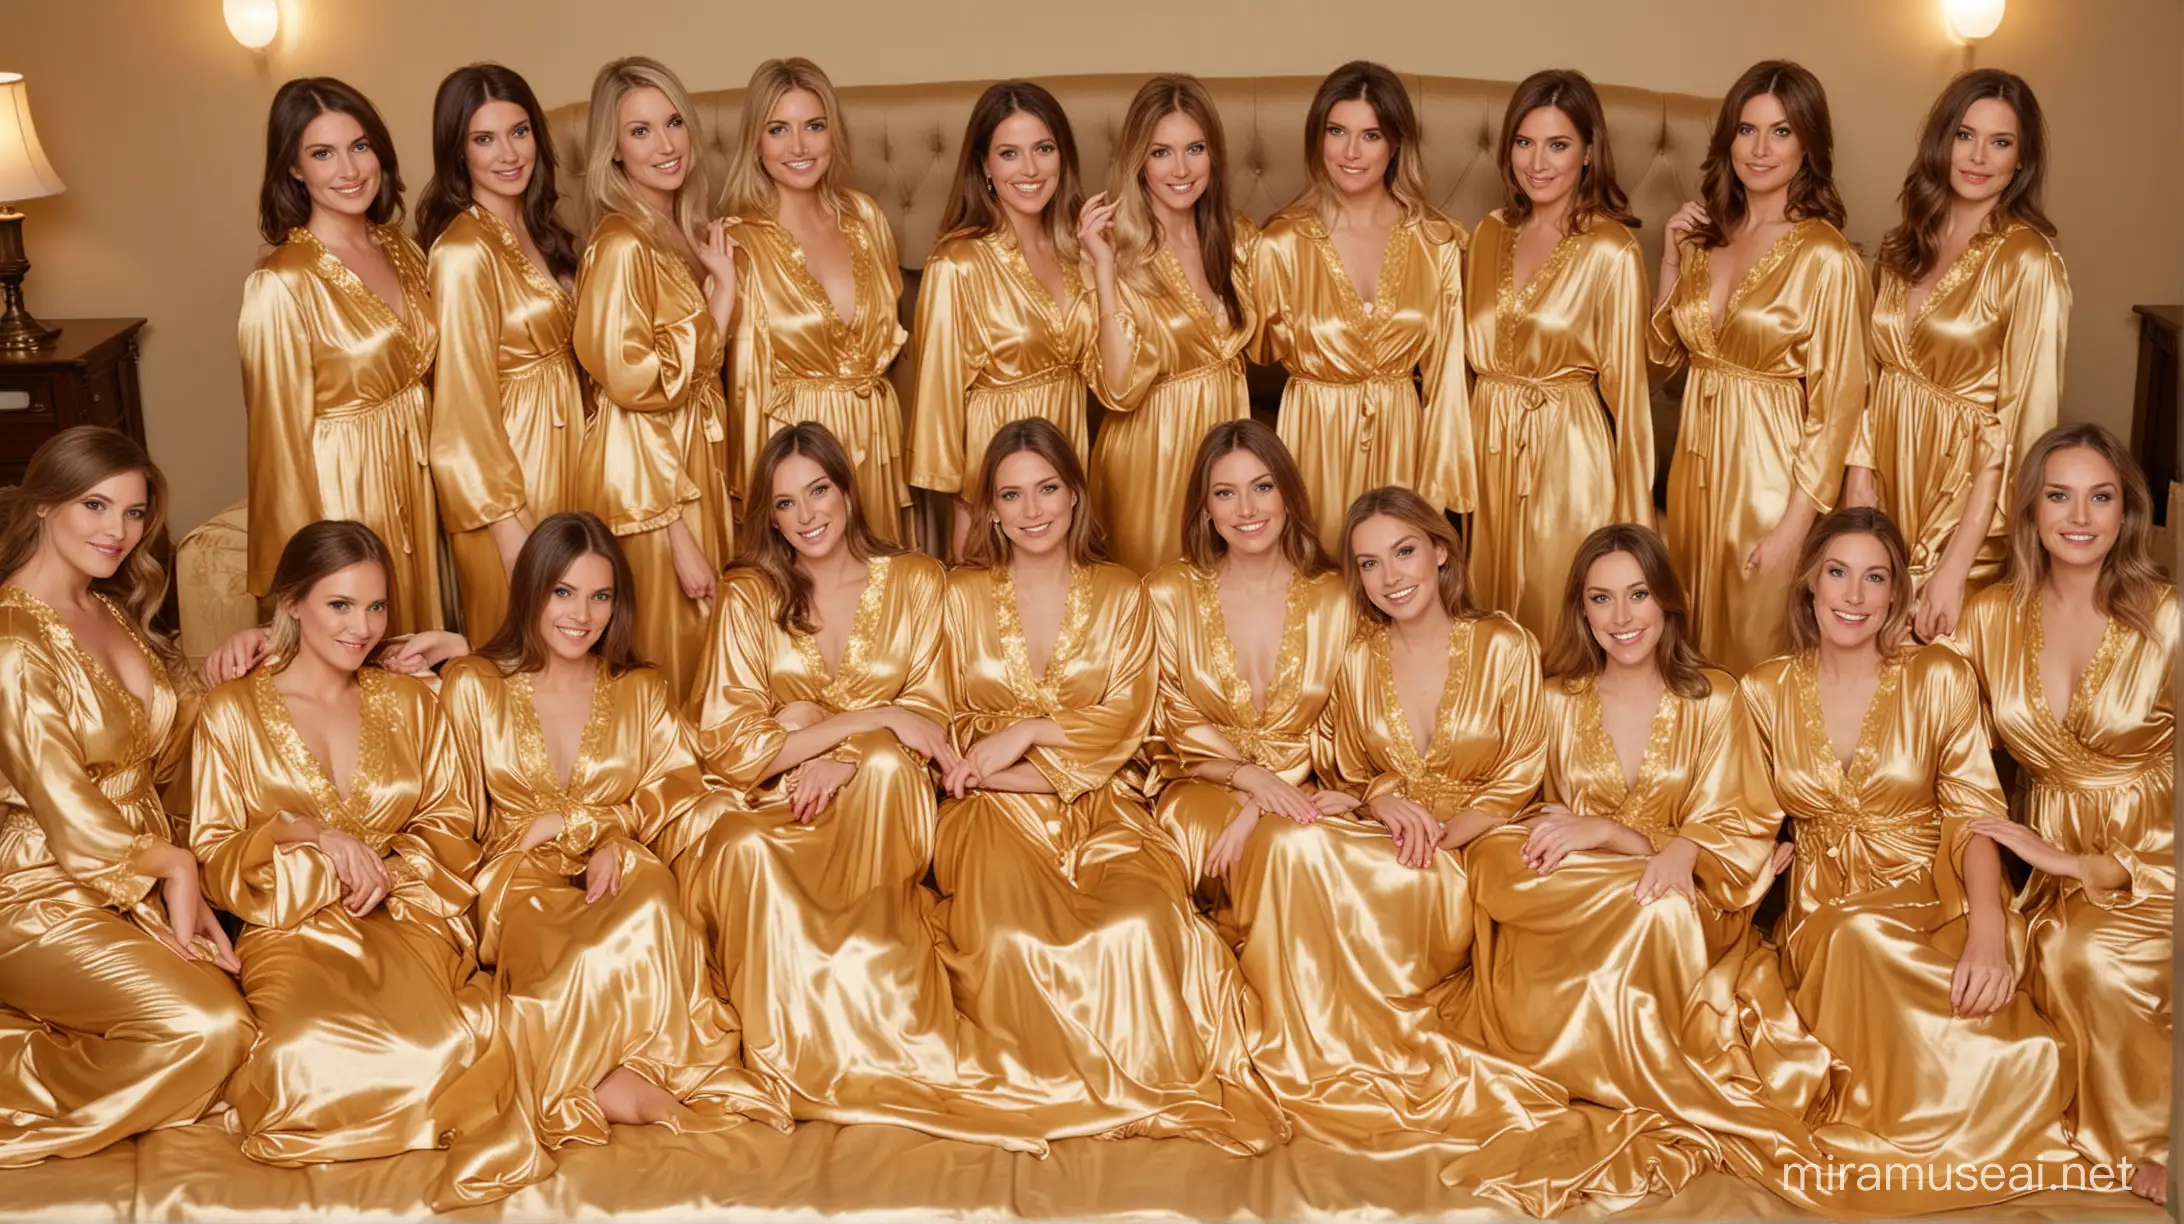 20 women in gold satin nightgowns on satin beds